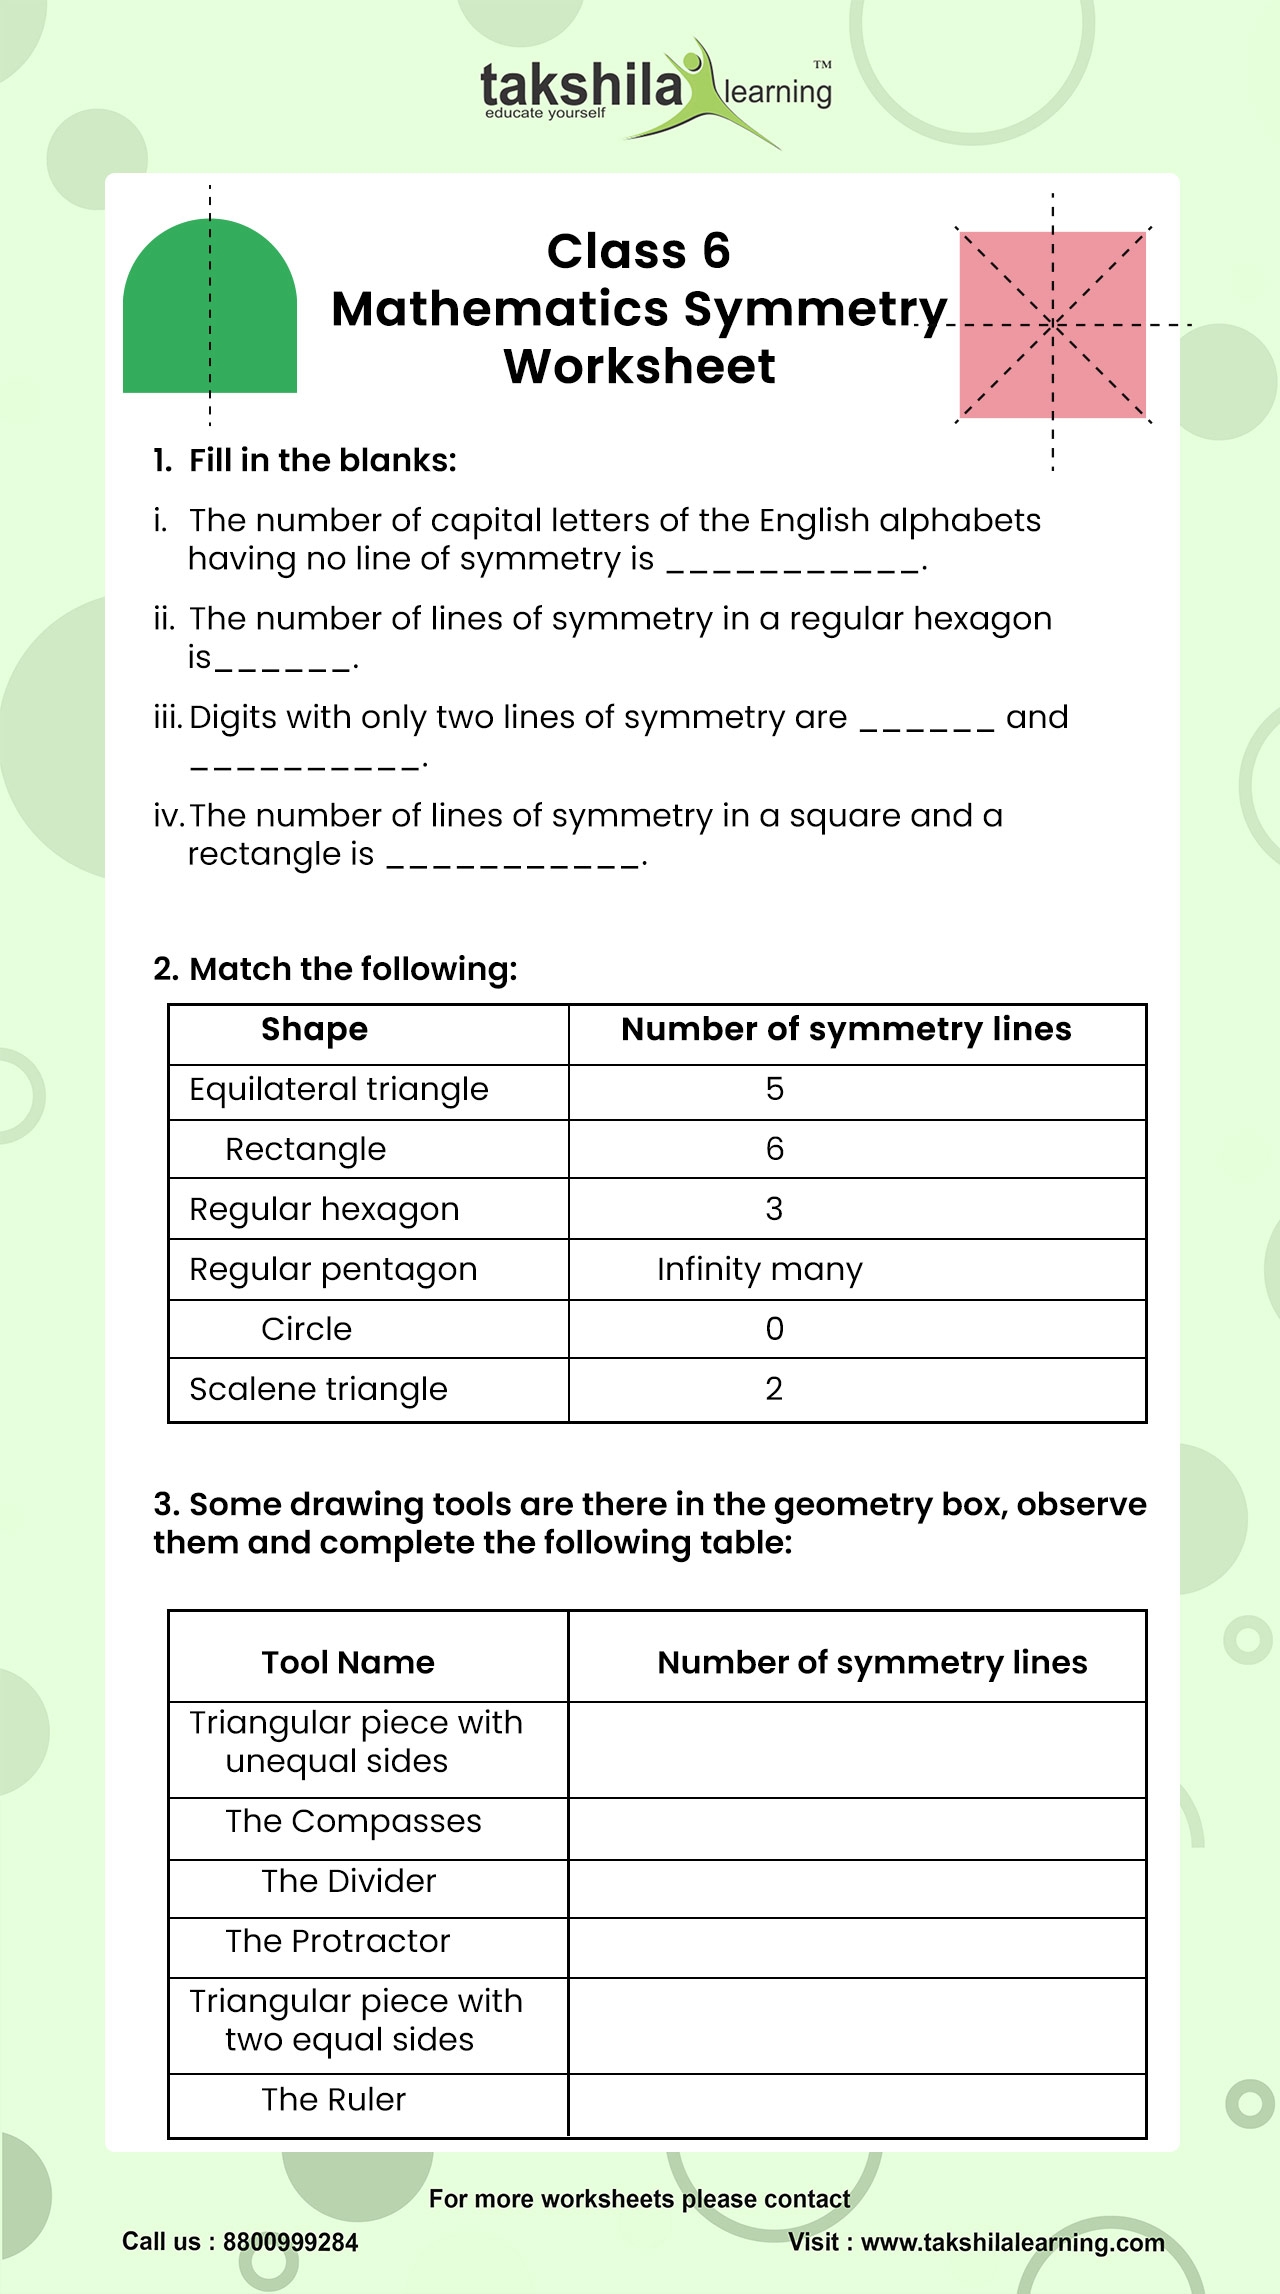 class-6-maths-symmetry-worksheets-with-answers-cbse-icse-math